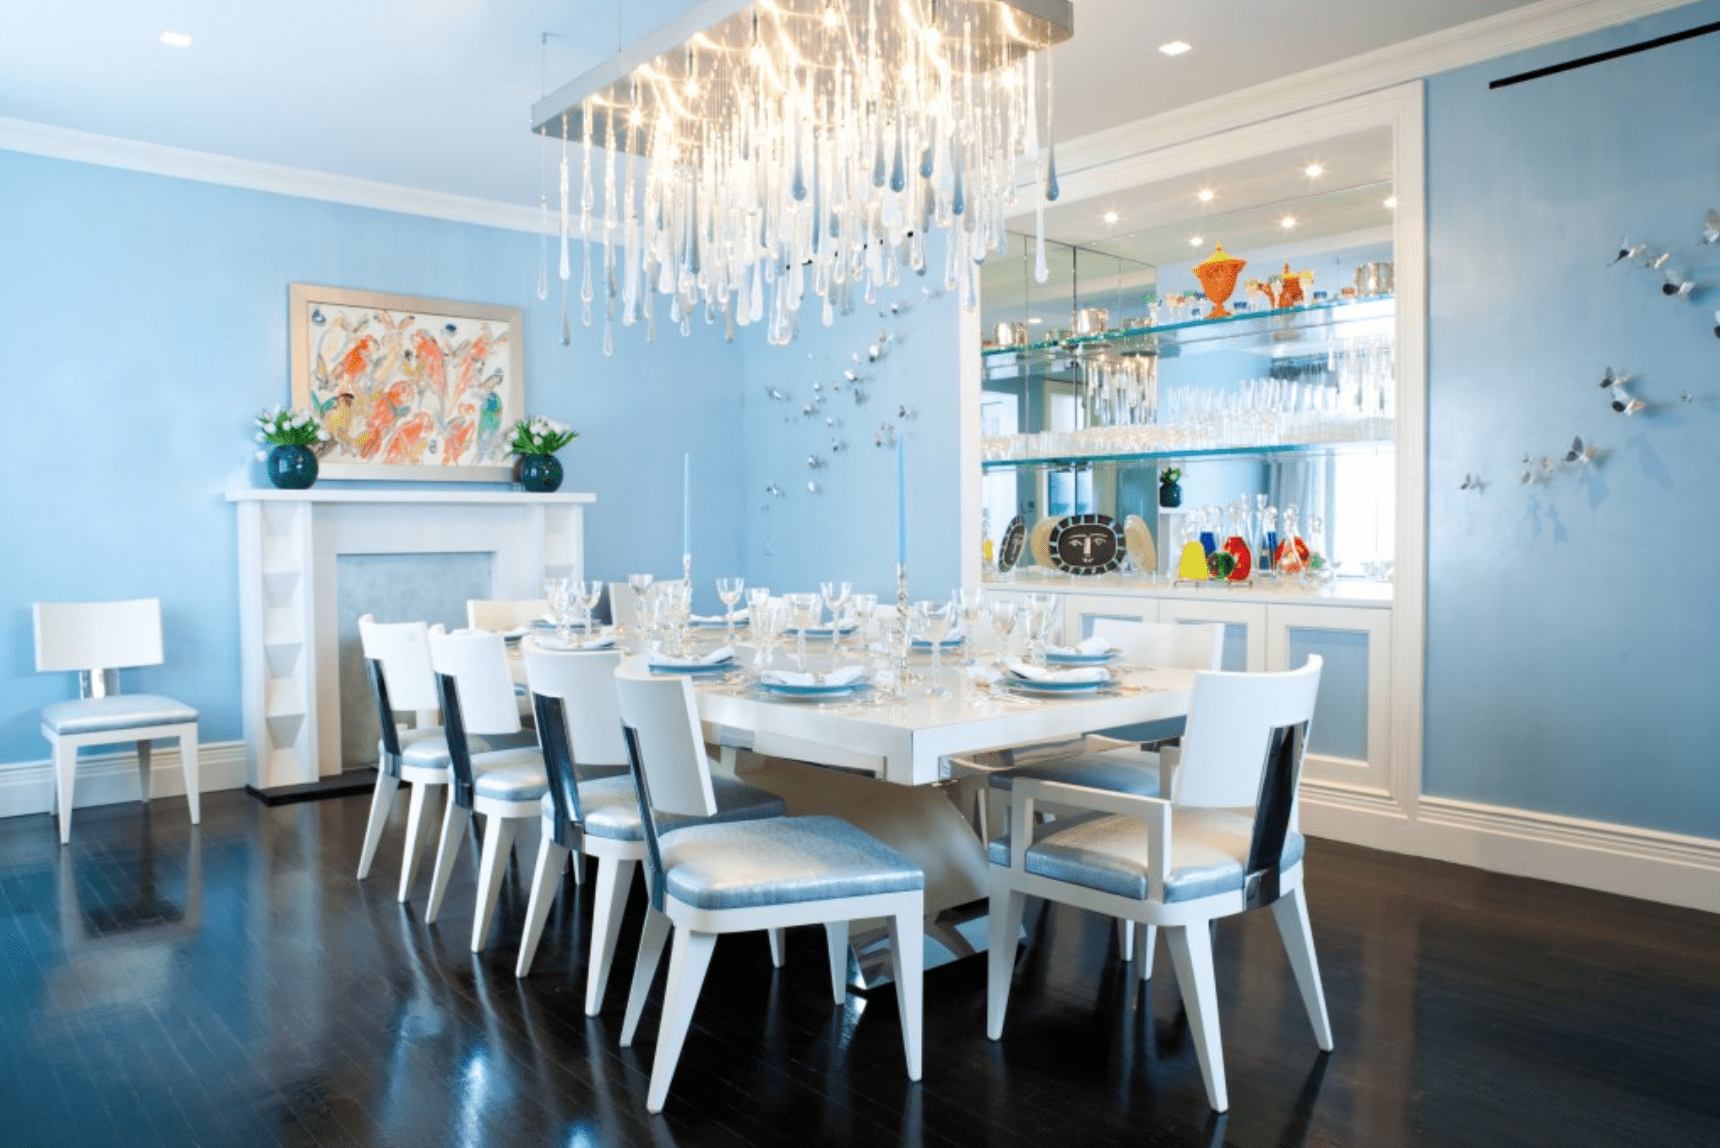 888 Park Dining Room by Guy Clark (Lucia Engstrom Davidson)